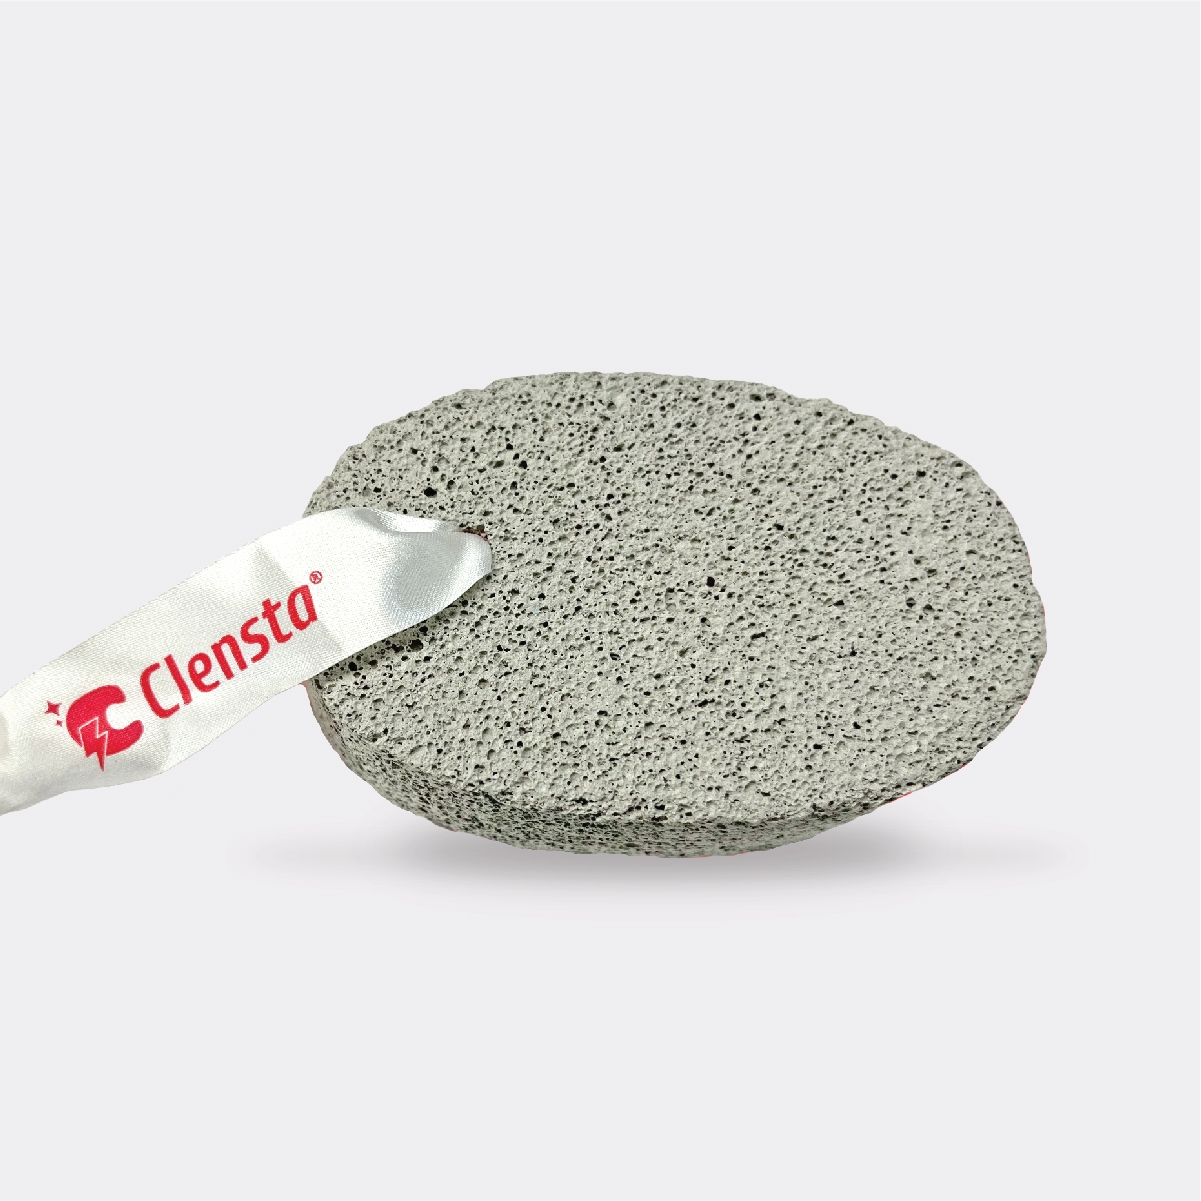 Clensta Foot Scrubber for Dead Skin | Pumice stone for foot scrub | Pedicure Tools for Feet | Foot Filer For Women | Foot Scrub | Heel Scrubber For Dead Skin | Pumice stone for body scrub